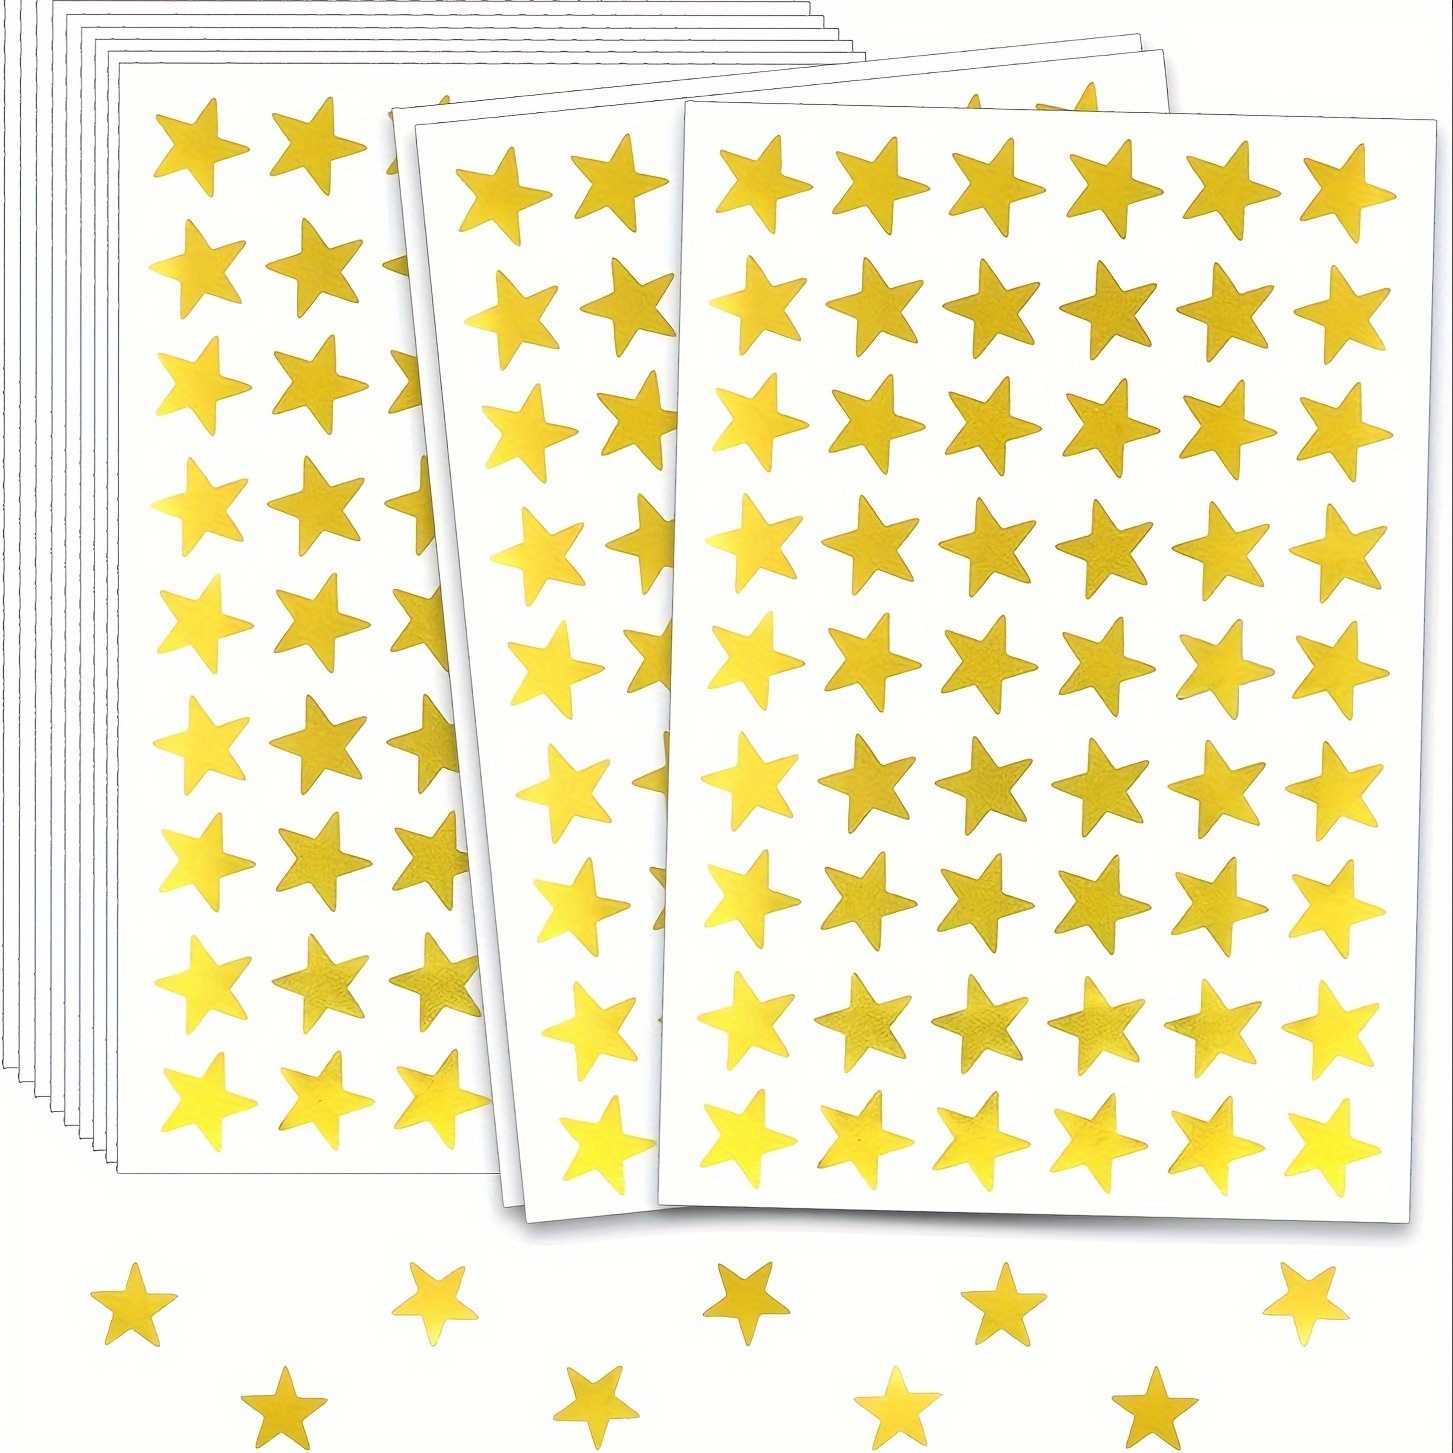 Foil Gold Star Stickers, 2 Inch Glitter Metallic Stars Self Adhesive Labels  - Shiny Foil Teacher Supplies - Scrapbooking Party Favors (500 Per Roll)